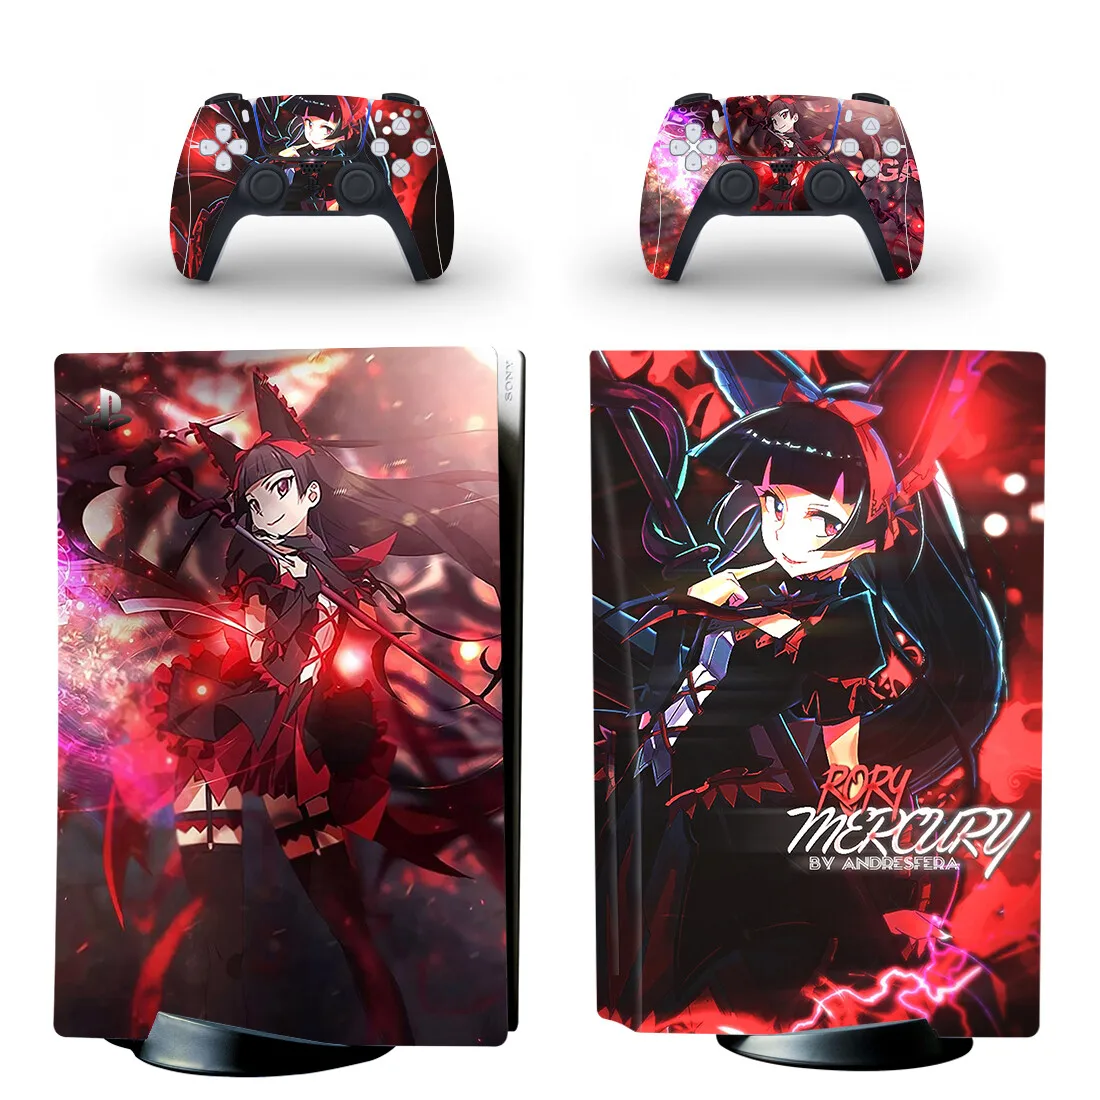 Anime Girl Rory Mercury PS5 Standard Disc Skin Sticker Decal Cover for PlayStation 5 Console and Controllers PS5 Disk Skin Vinyl